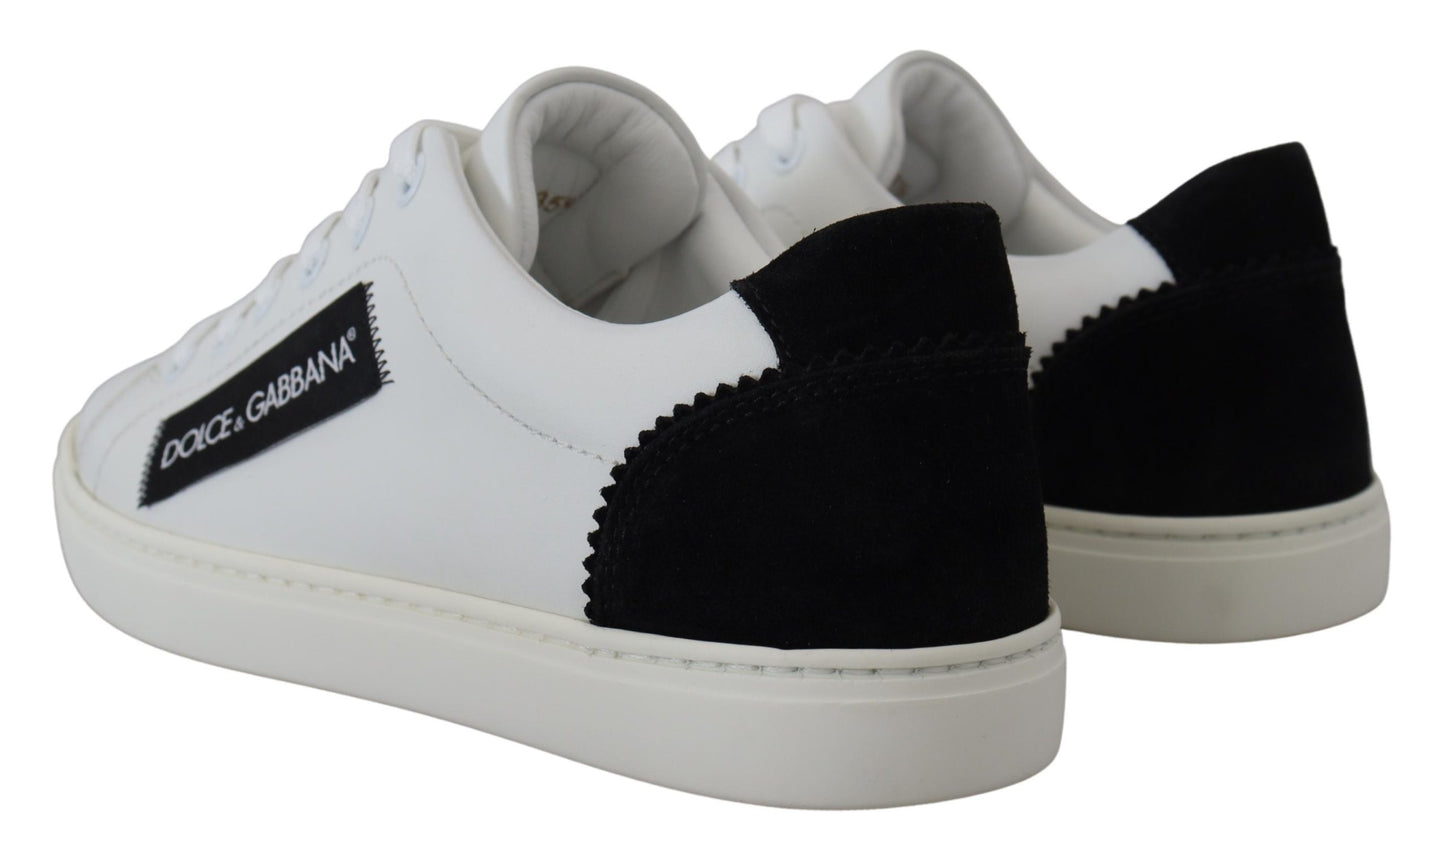 Dolce & Gabbana Elegant White Lace-Up Leather Sneakers